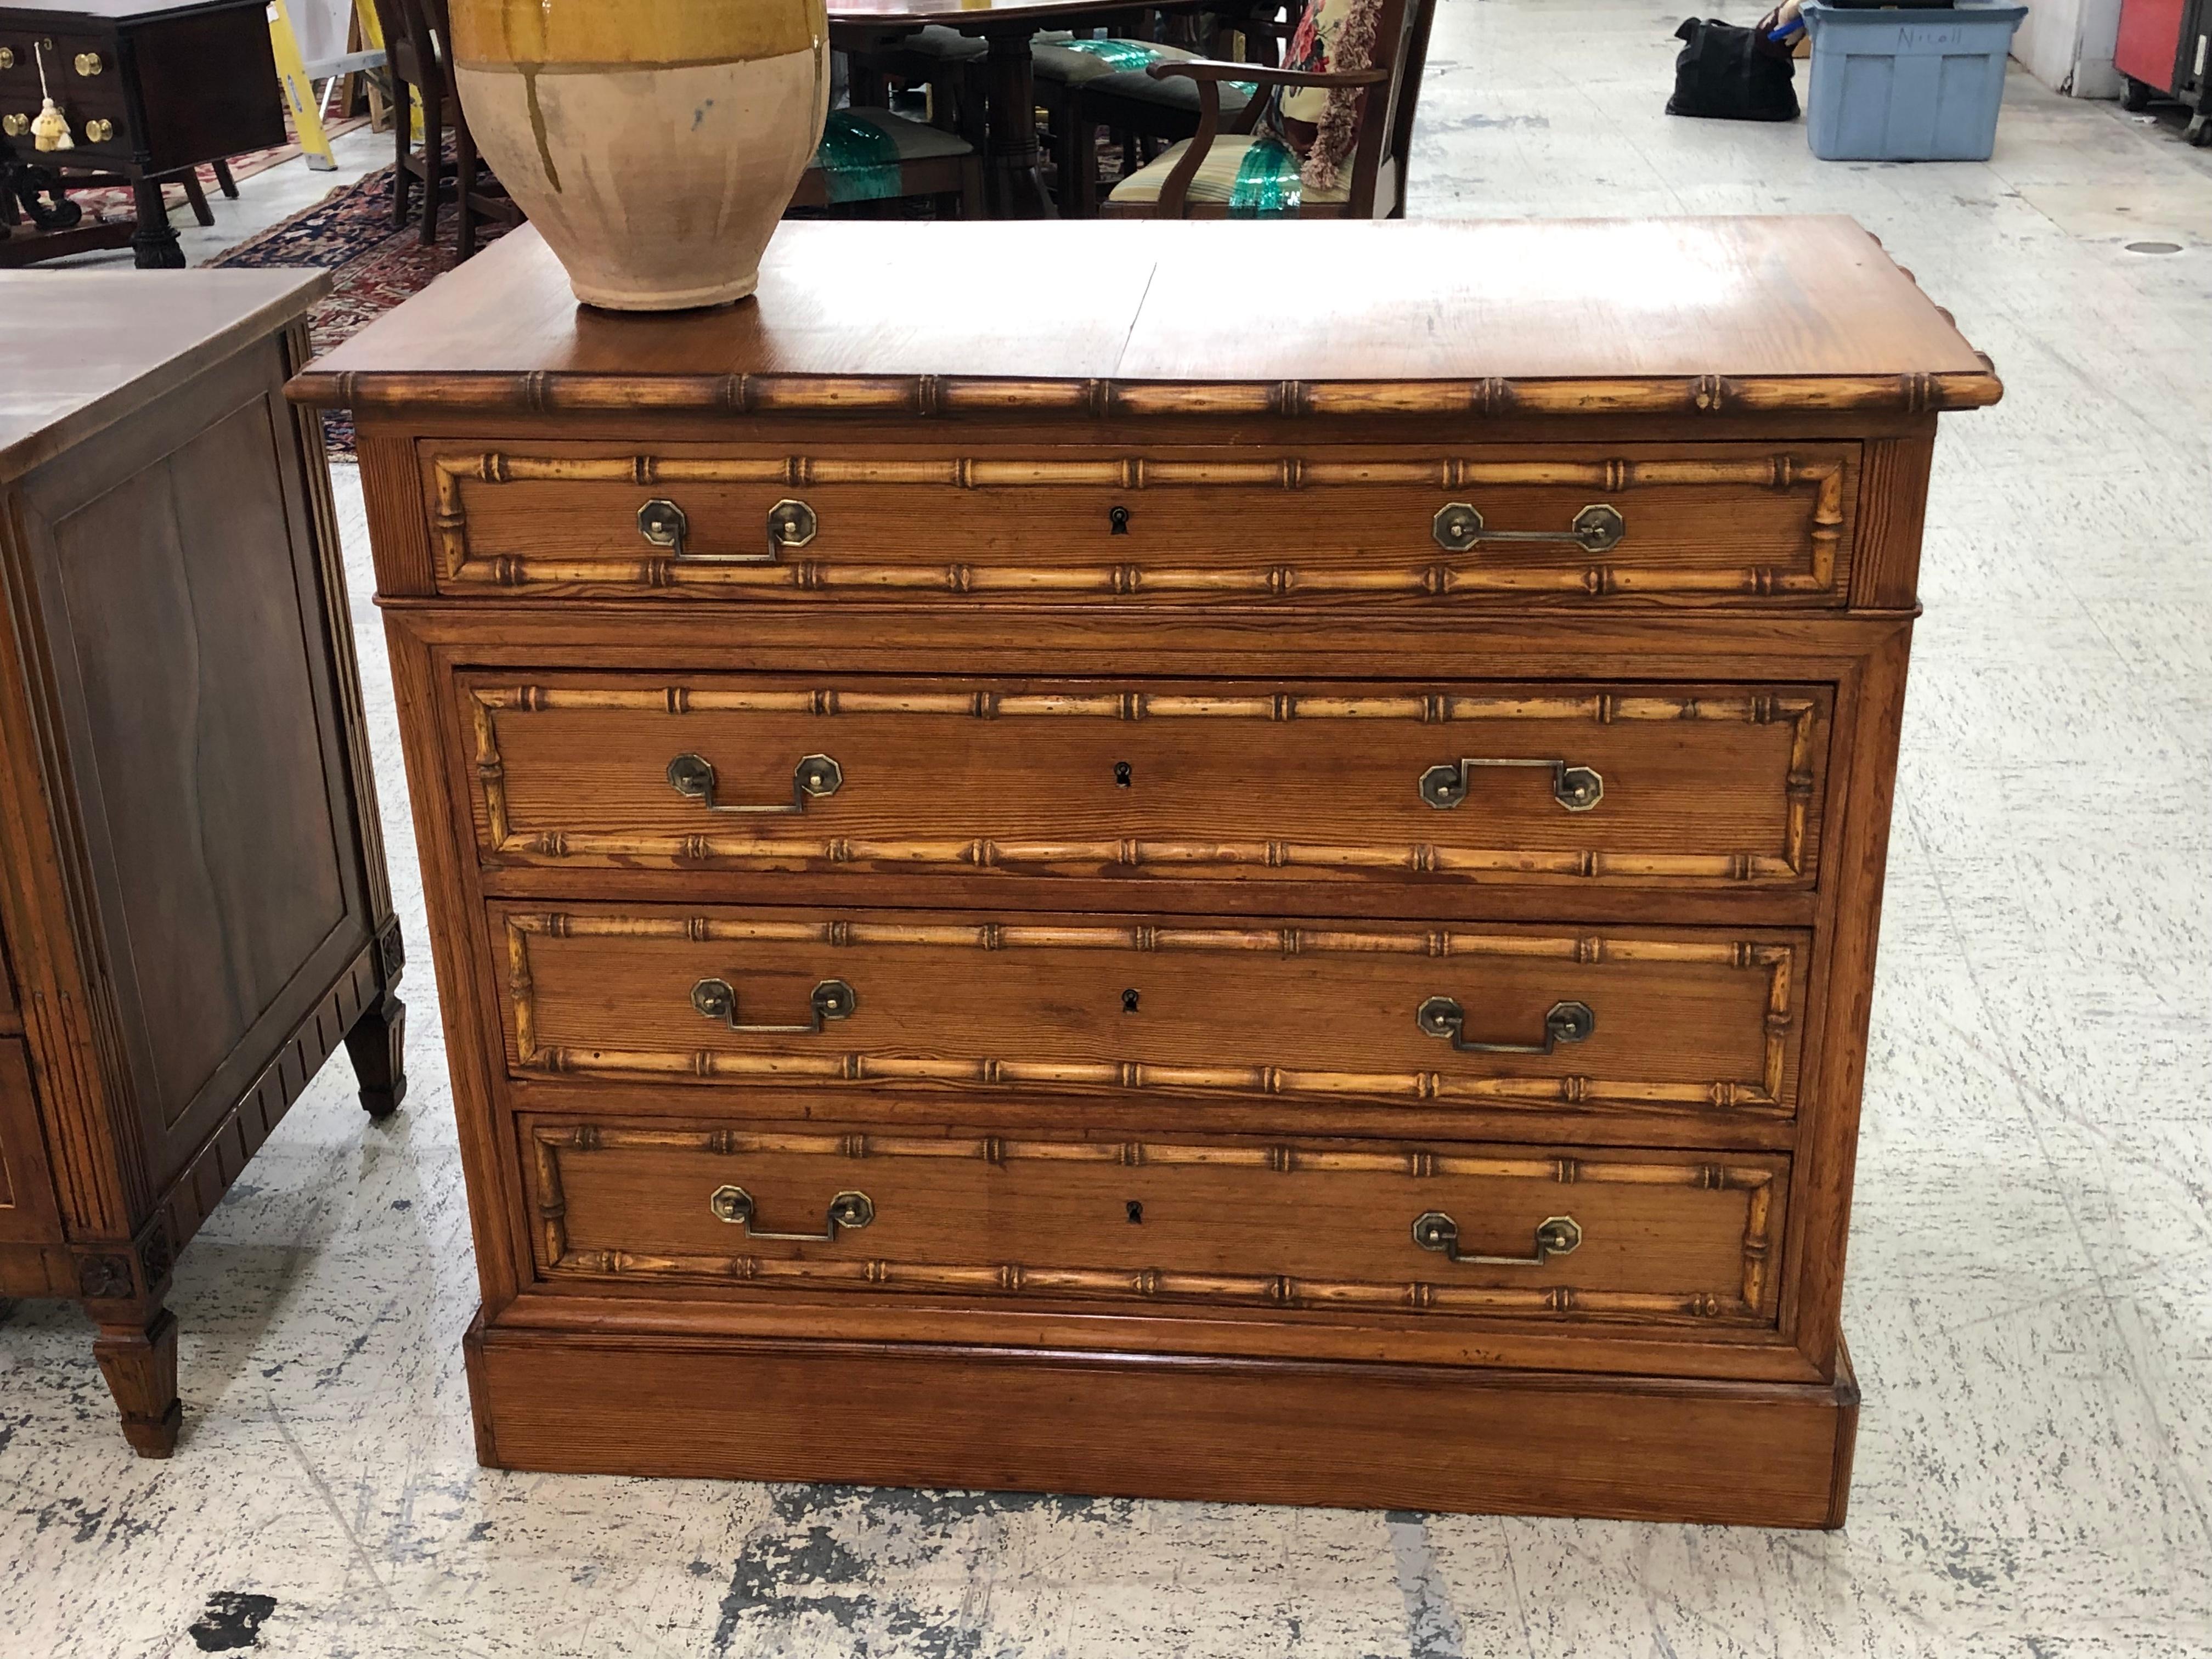 Faux bamboo mid-19th century chest. Original pulls. Pitch pine top.